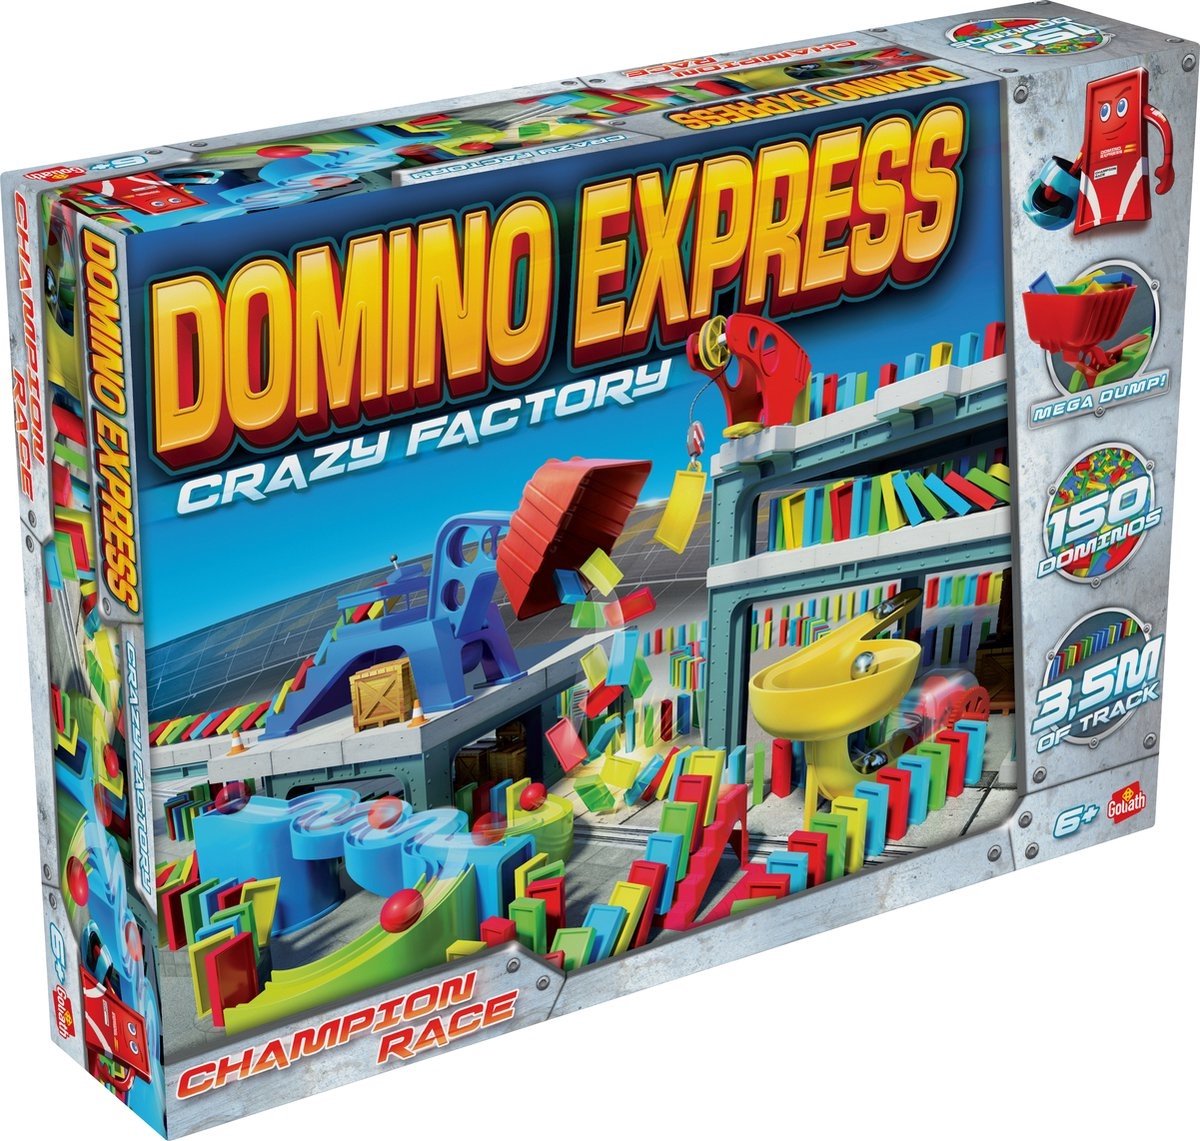 Domino Express Crazy Factory - Pack Domino